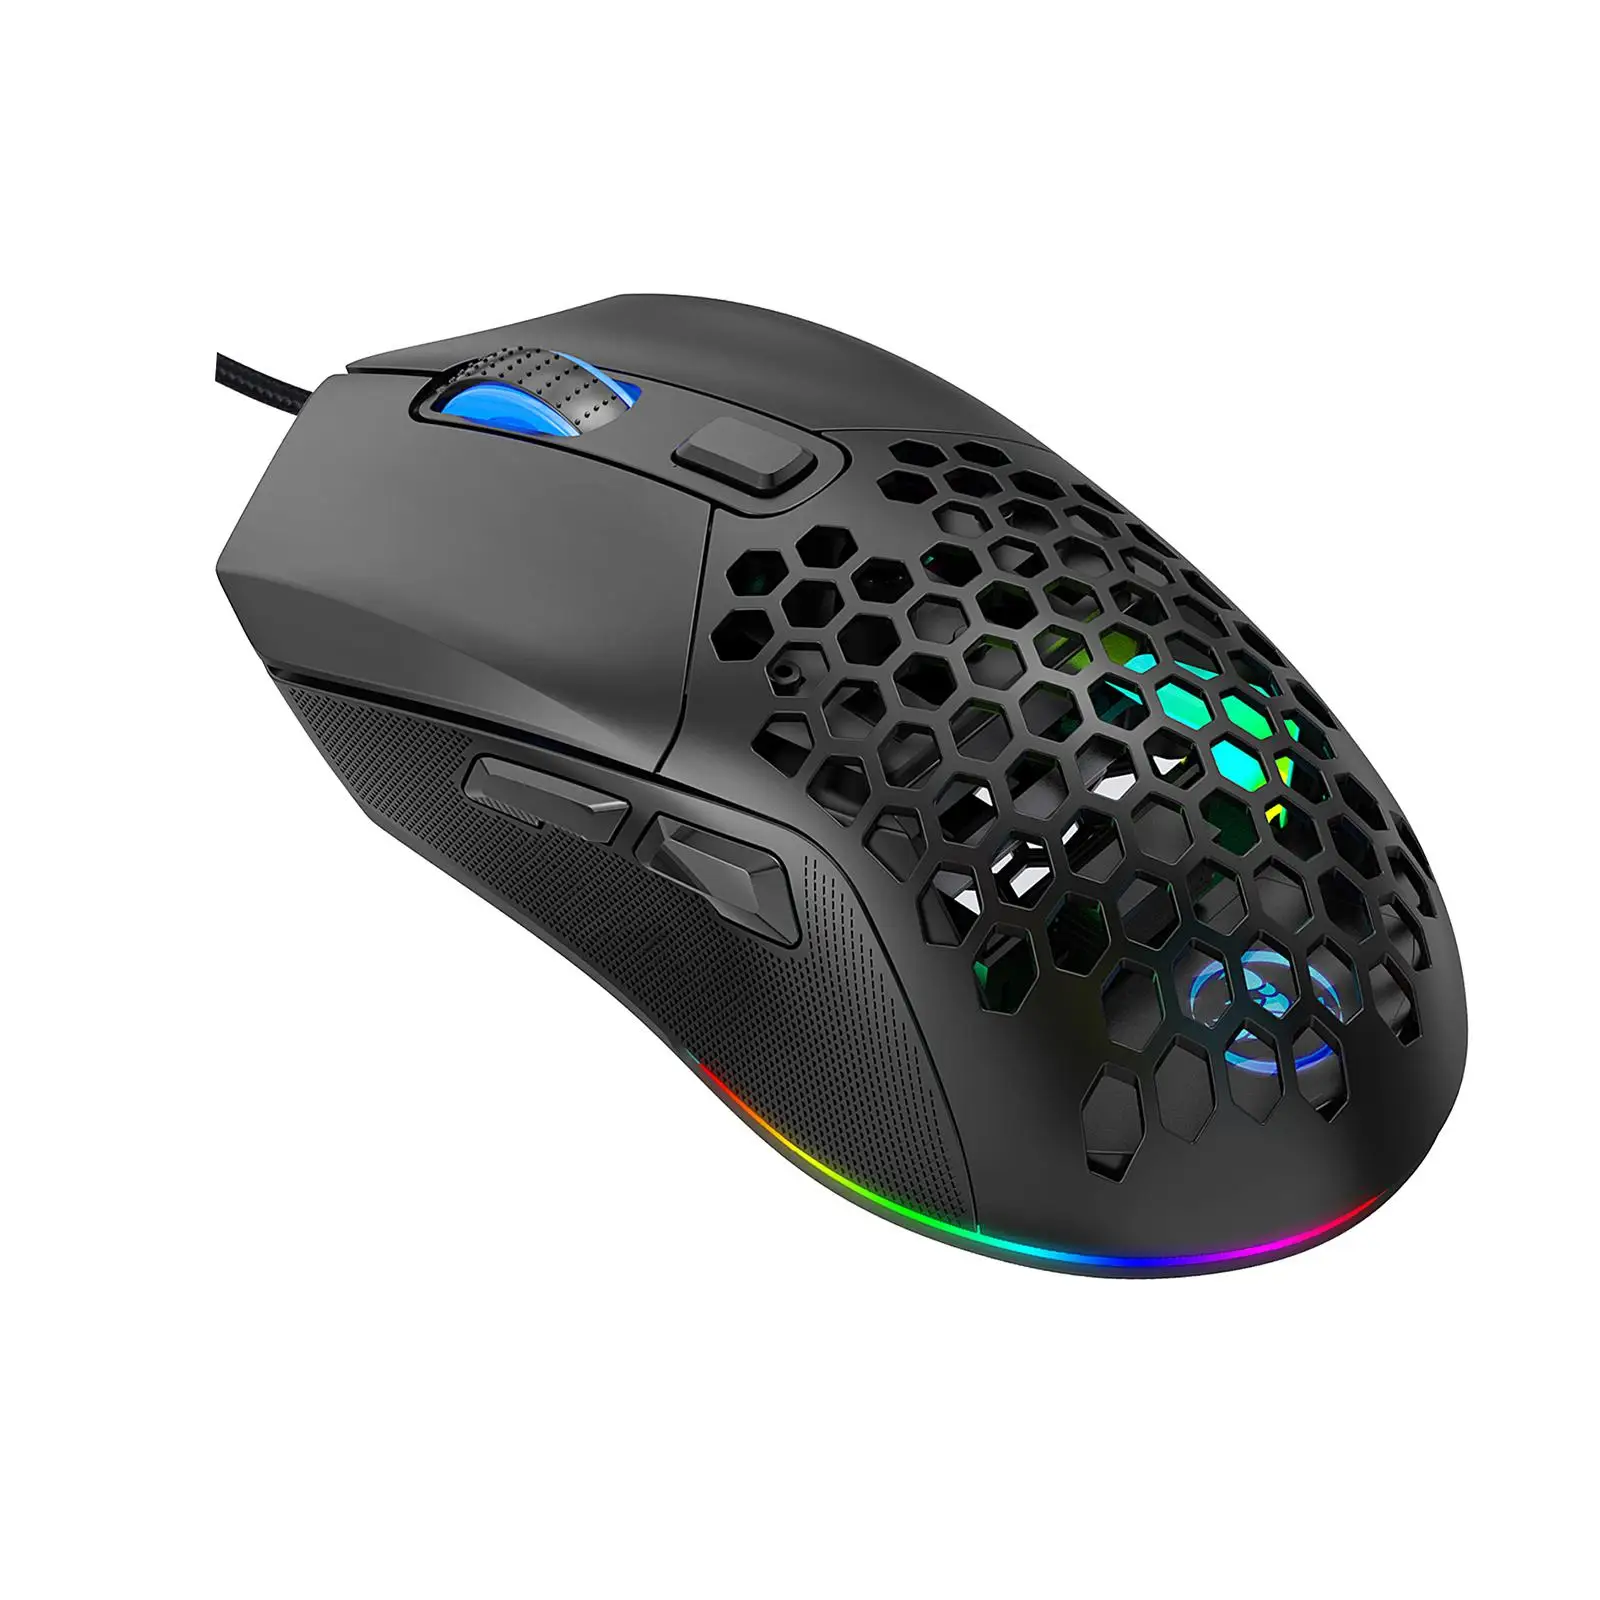 USB Wired Gaming Mouse 7200 DPI 6 Programmable Buttons RGB Backlit Mice for Laptop Gamer